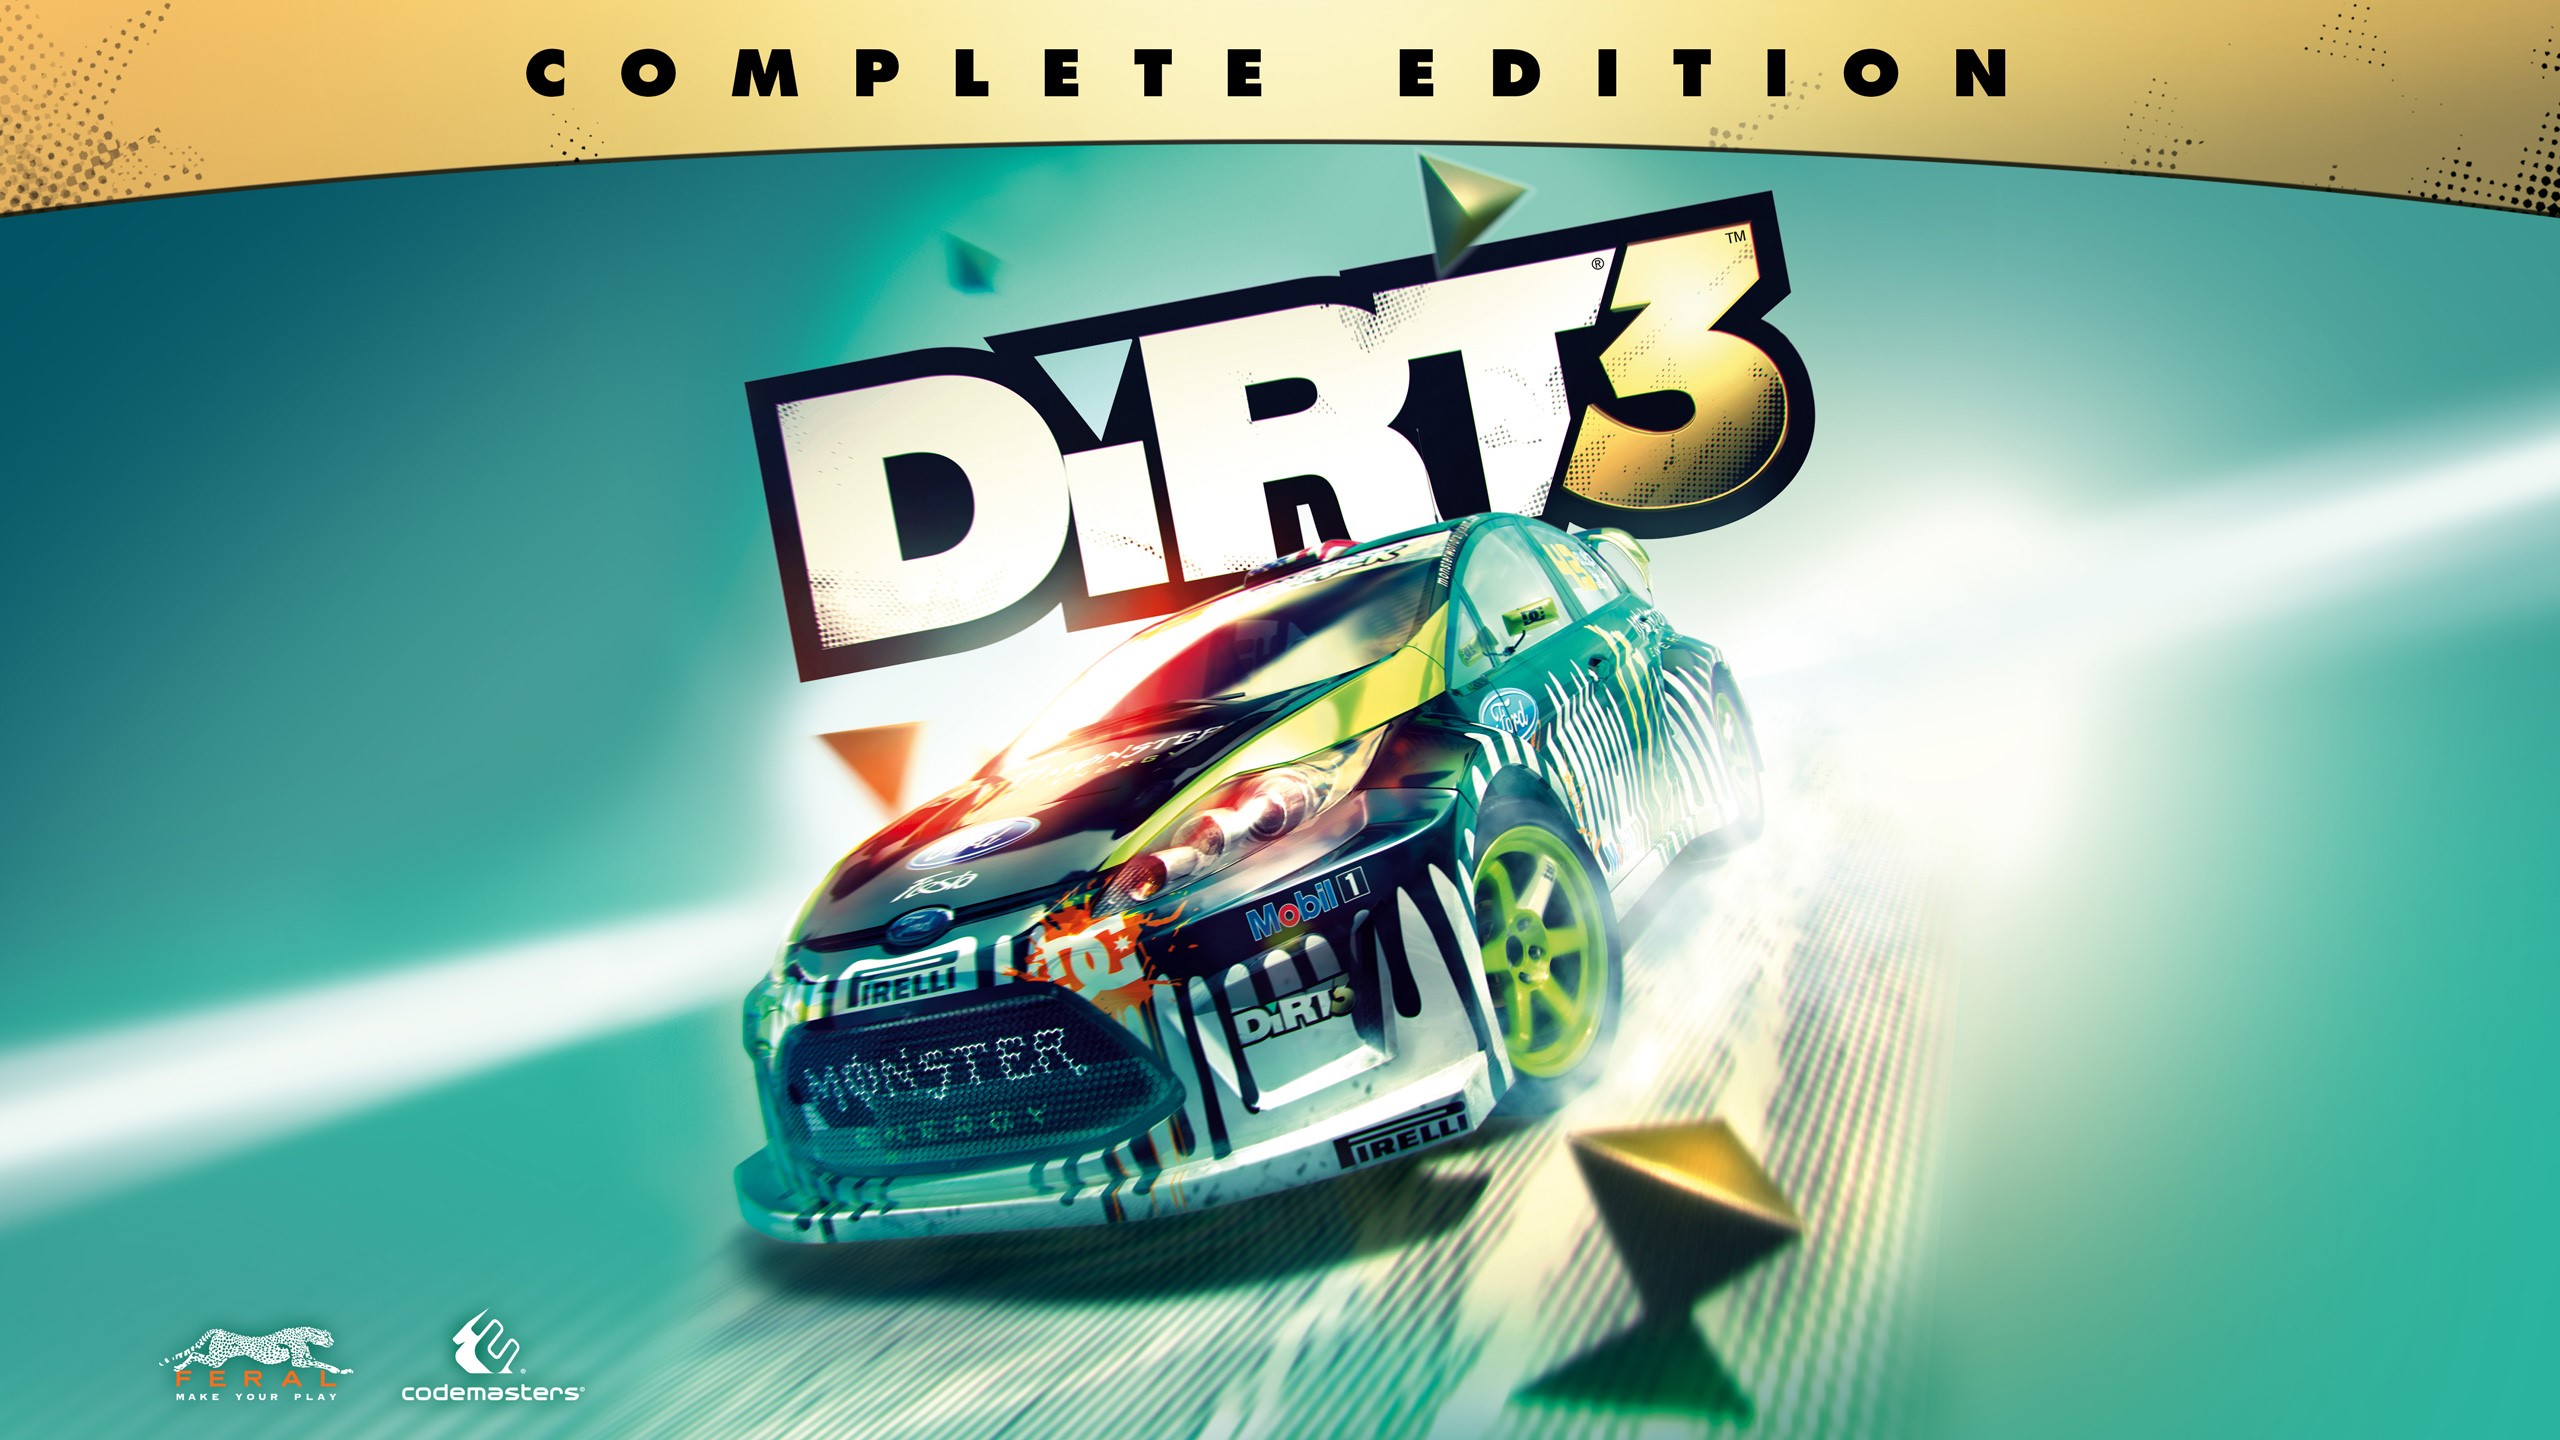 Complete edition game. Dirt Rally 3. Dirt 3 complete Edition. Colin MCRAE: Dirt 3. Dirt 3 complete Edition обложка.